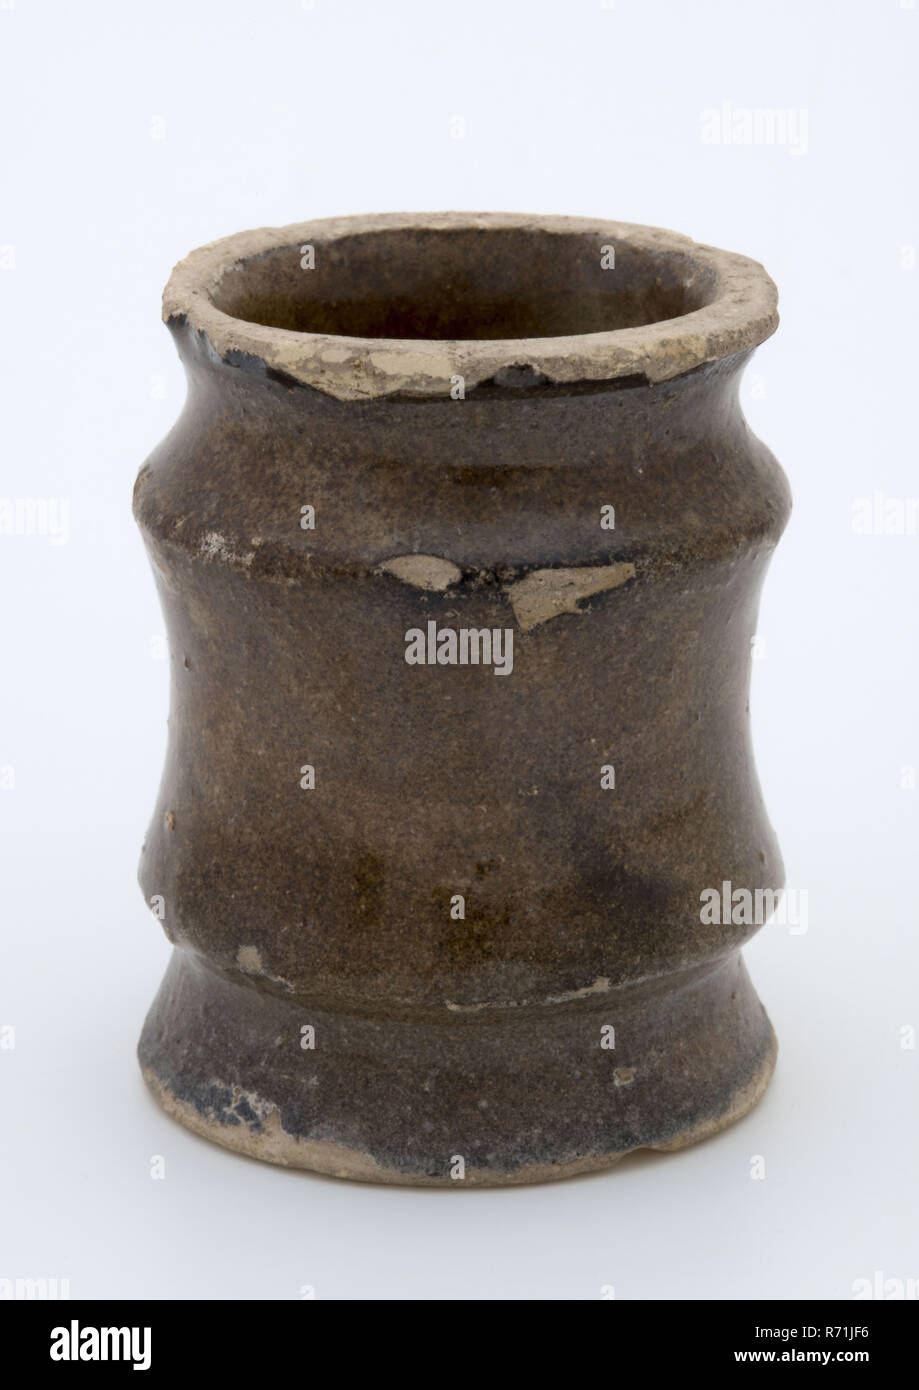 Pottery ointment jar, cylindrical with three constrictions, white glazed, ointment jar pot holder soil find ceramic earthenware glaze tin glaze, hand-turned baked 2x glazed earthenware ointment jar cylindrical in shape with three necking Fully glazed white. Stand area with deducting rails. Dark discolored by staying in the soil. So called Delftware in the form of an albarello archeology health care indigenous pottery packing pharmacy store selling medicine drug craft Stock Photo